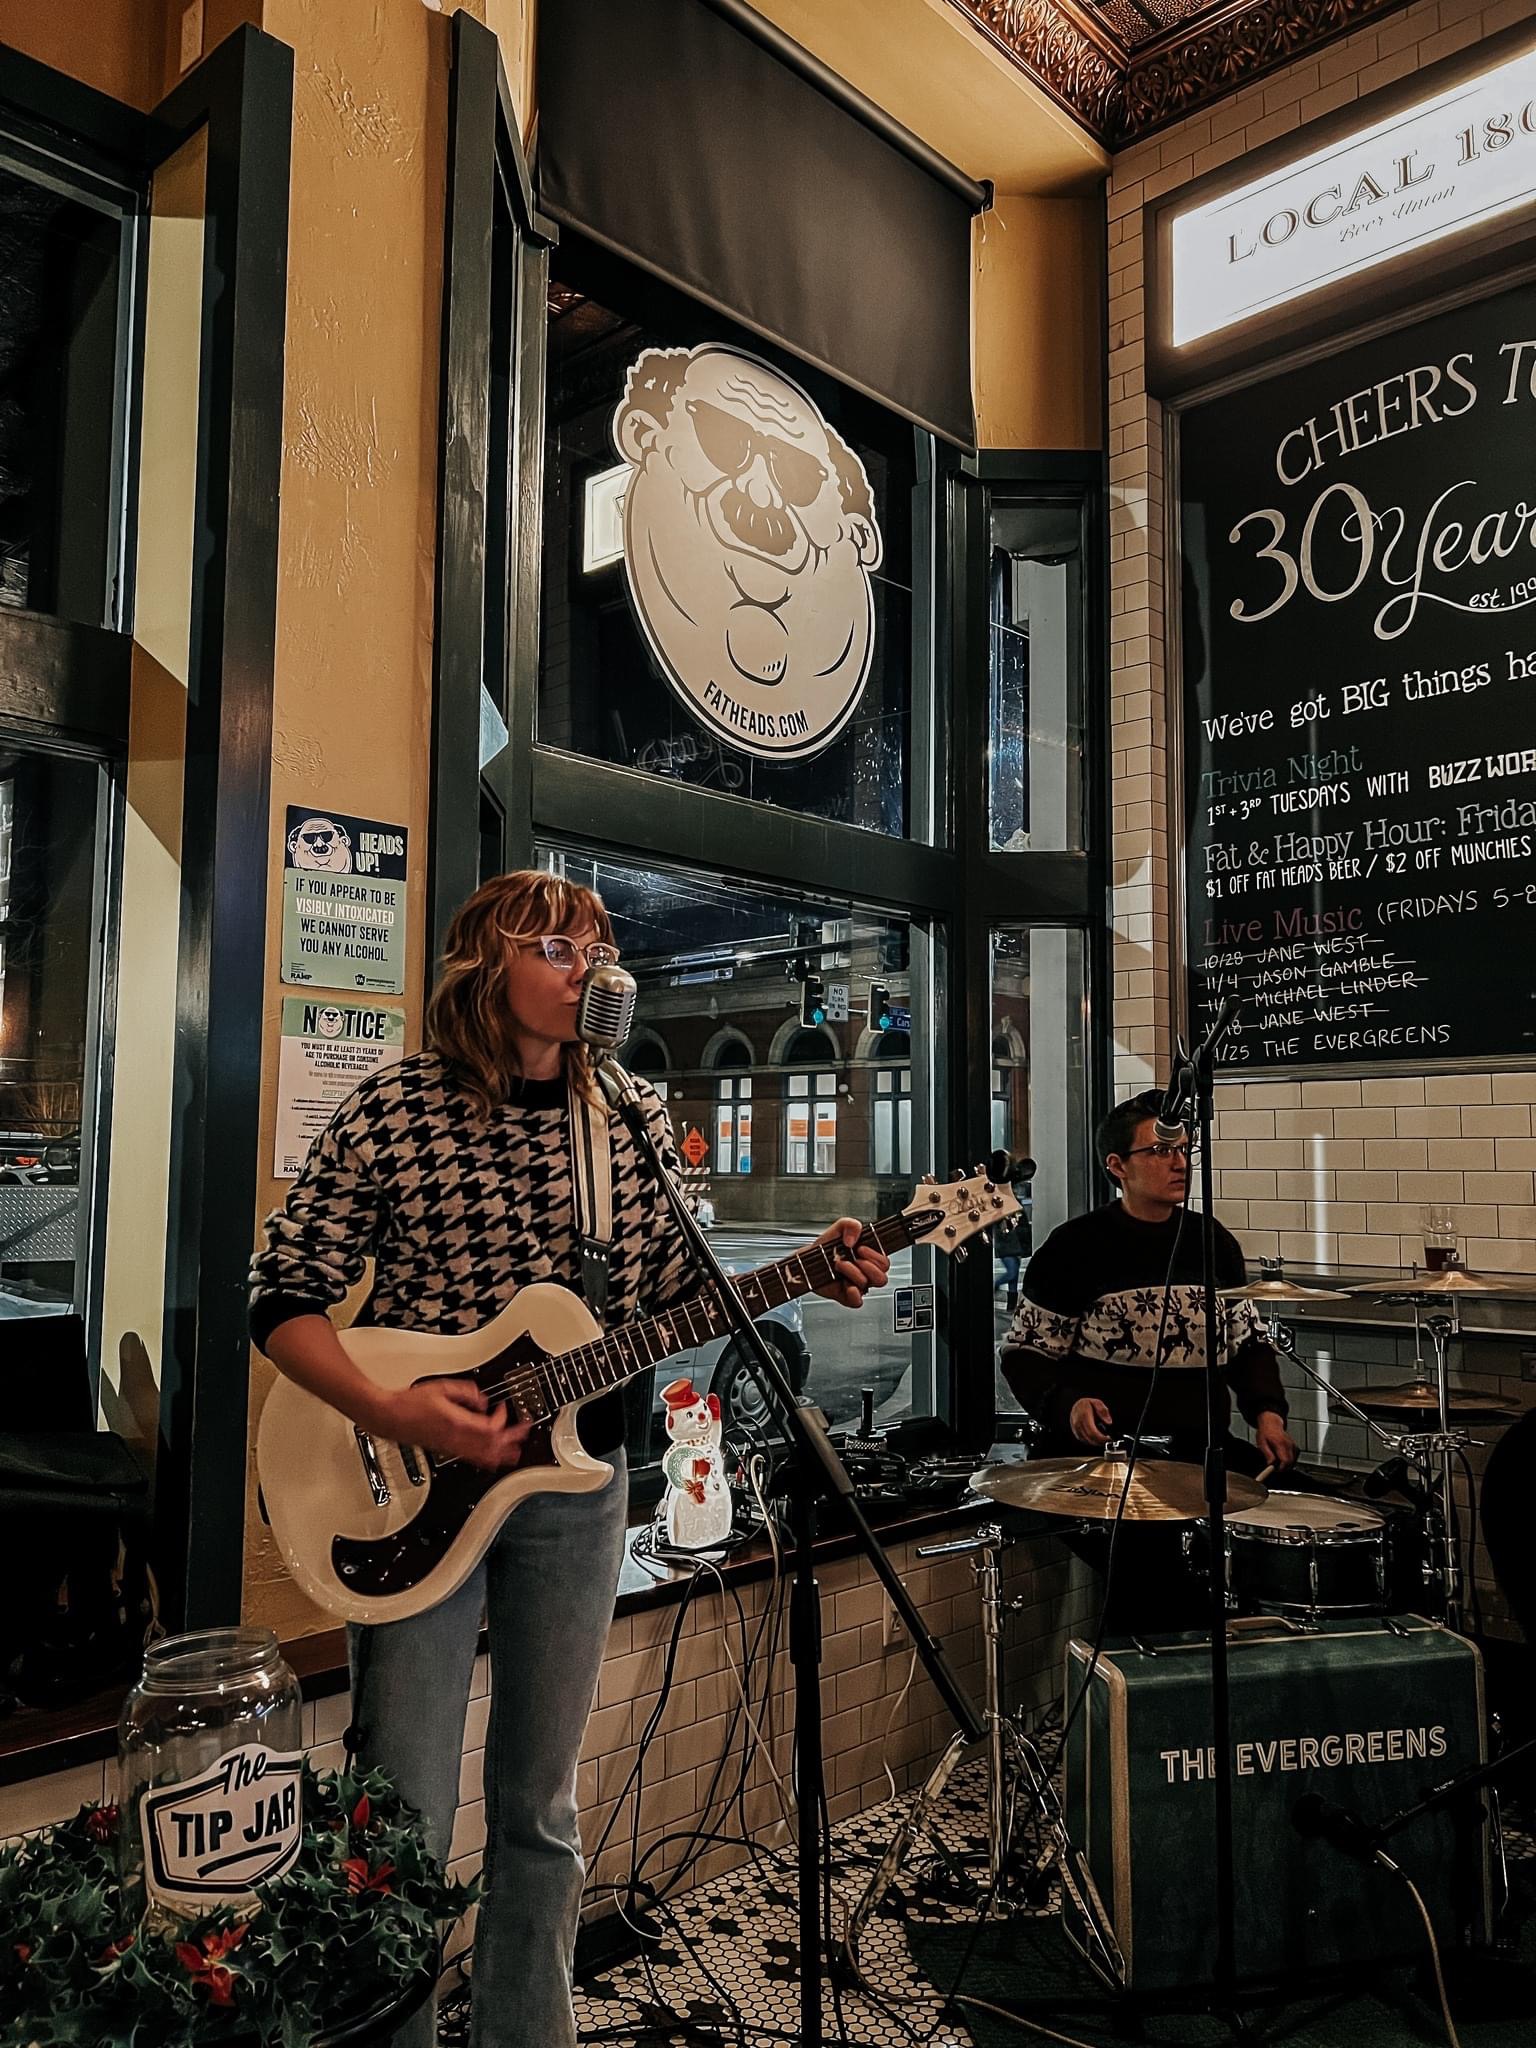 Live Music with The Evergreens